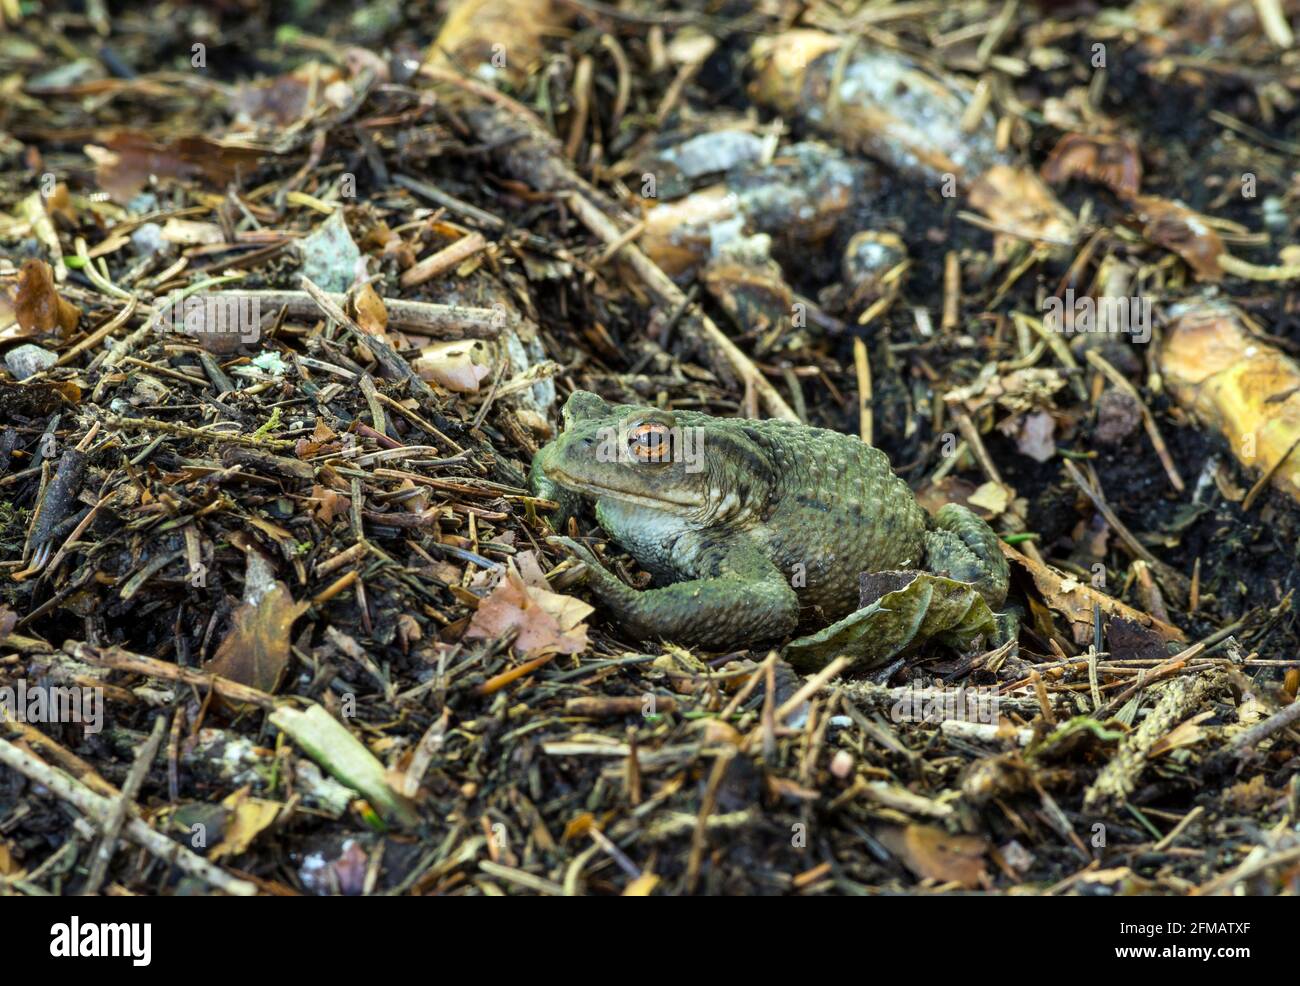 Germany, Baden-Wuerttemberg, common toad, Bufo bufo, specially protected species. Stock Photo